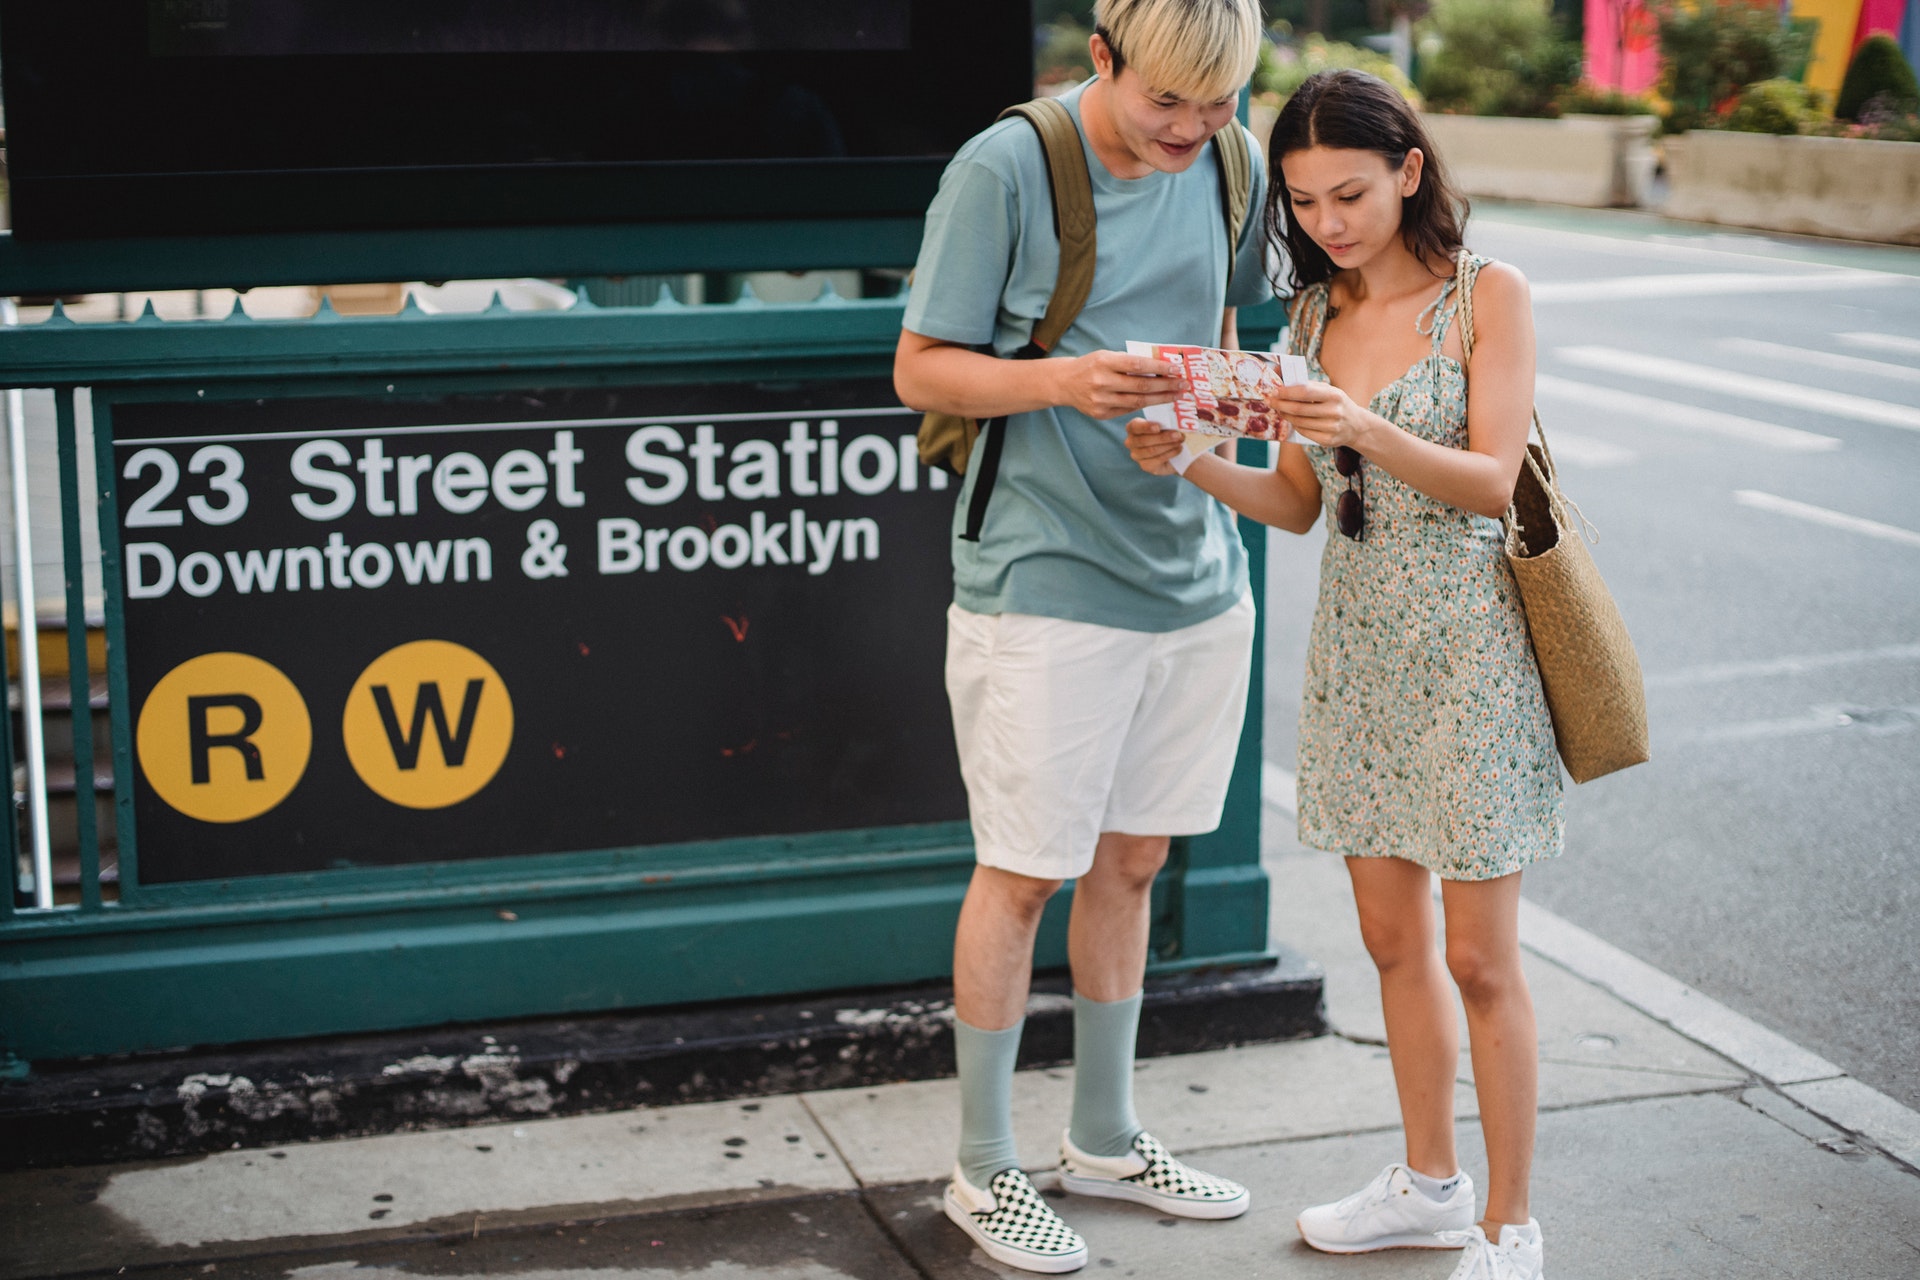 A man and a woman are looking at a map in front of a subway station in New York City